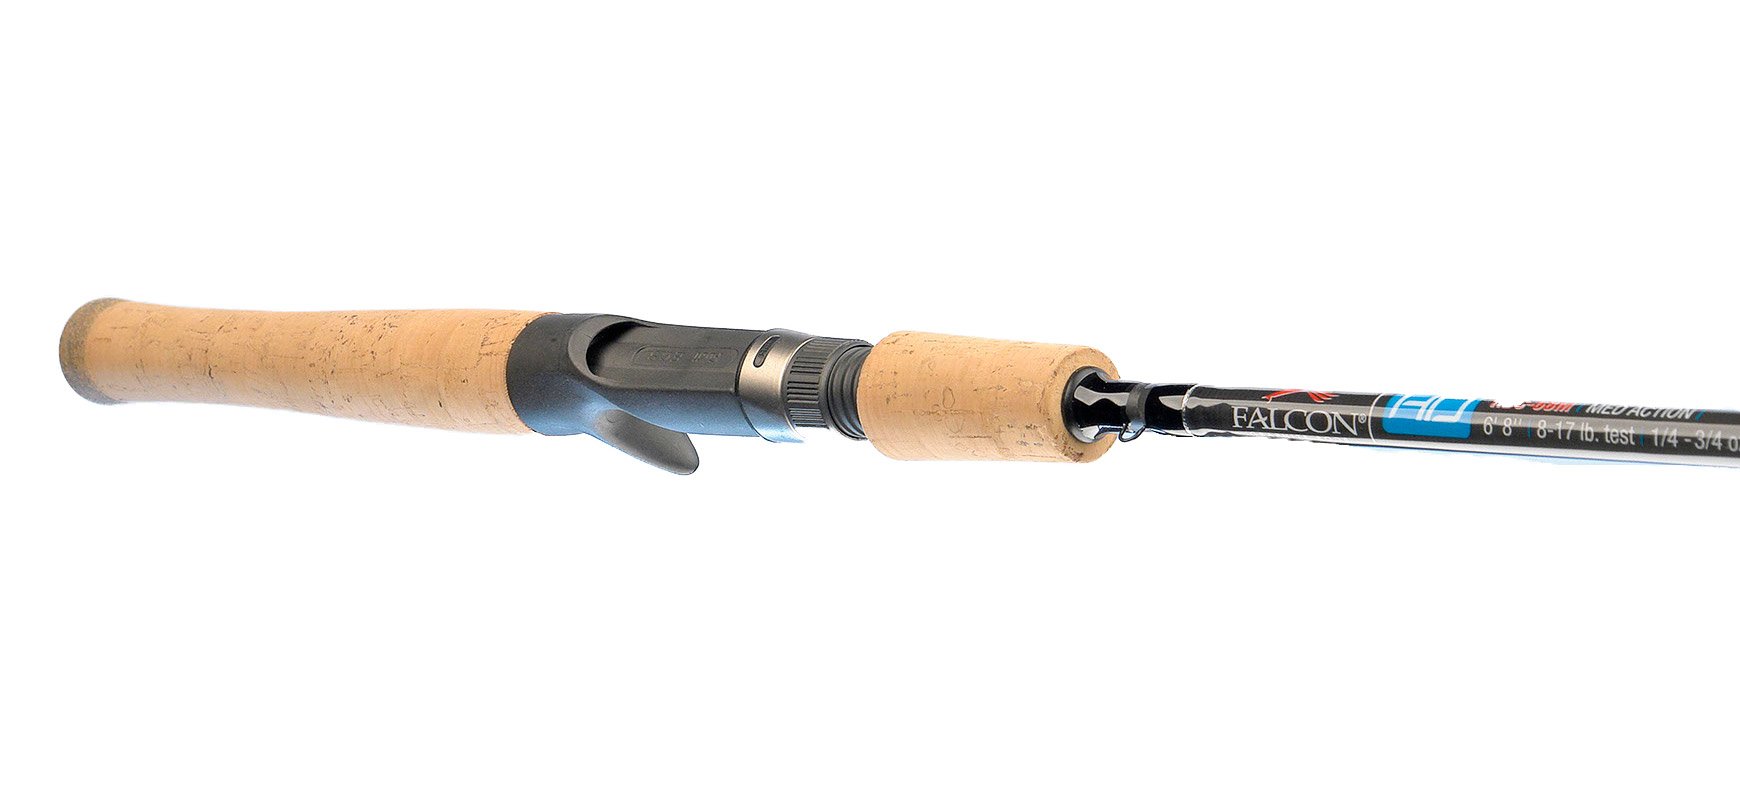 Falcon HD Spinning Rods